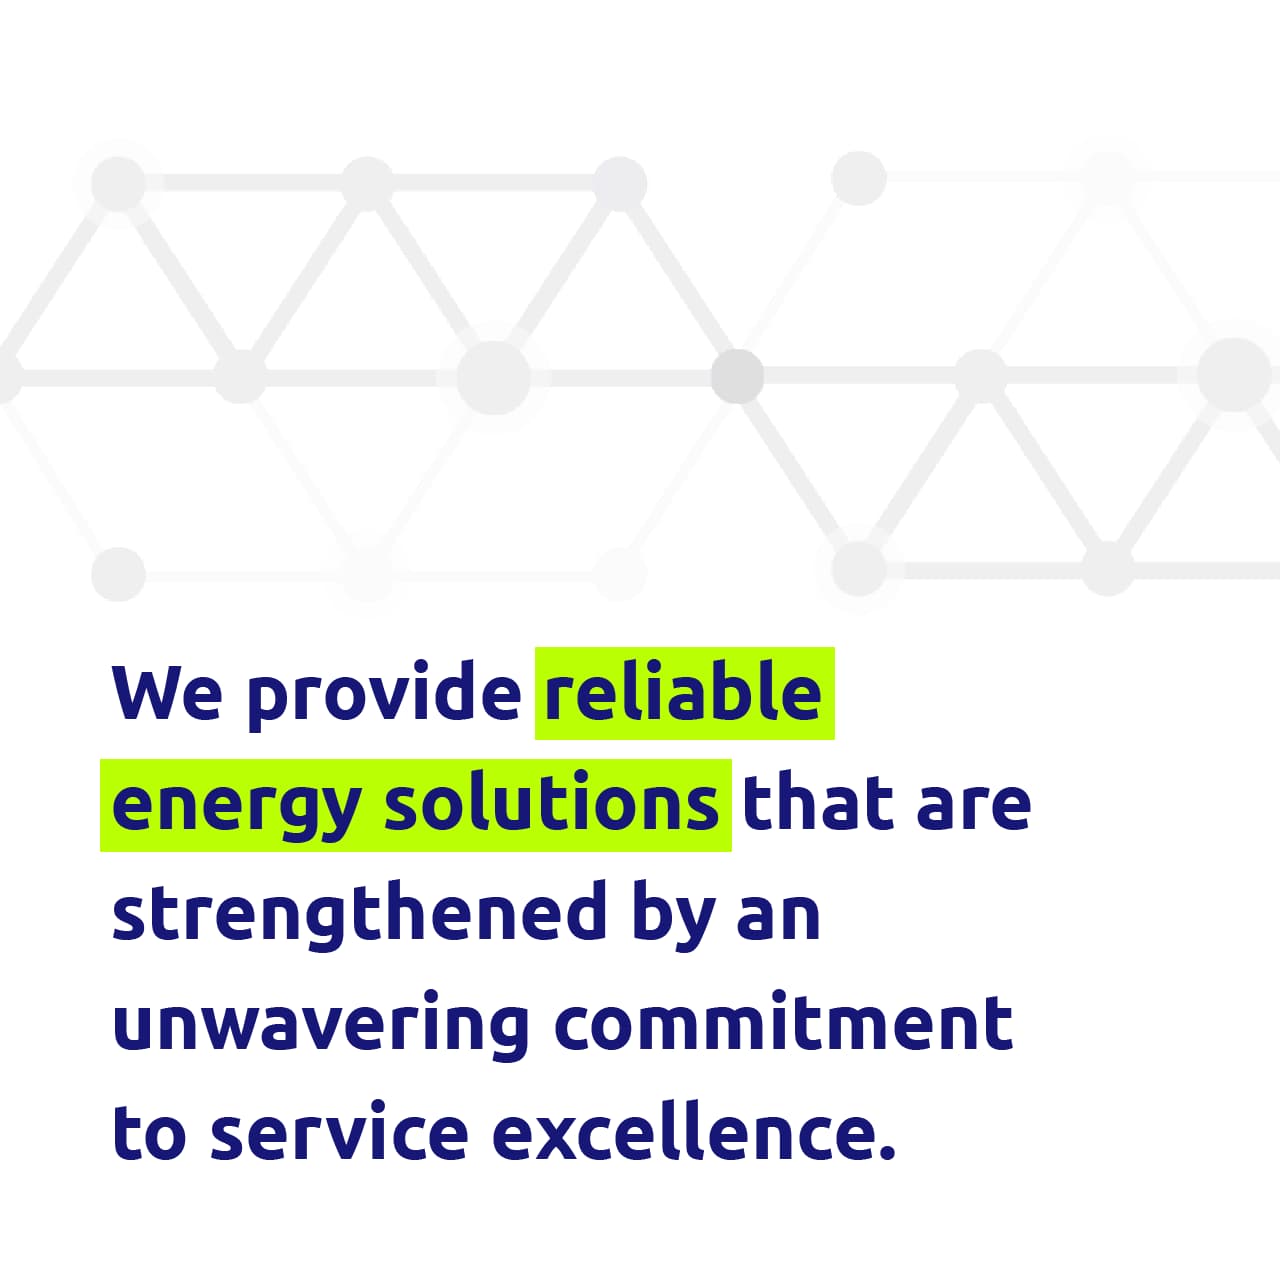 GrandBridge quote "We provide reliable energy solutions that are strengthened by an unwavering commitment to service excellence."